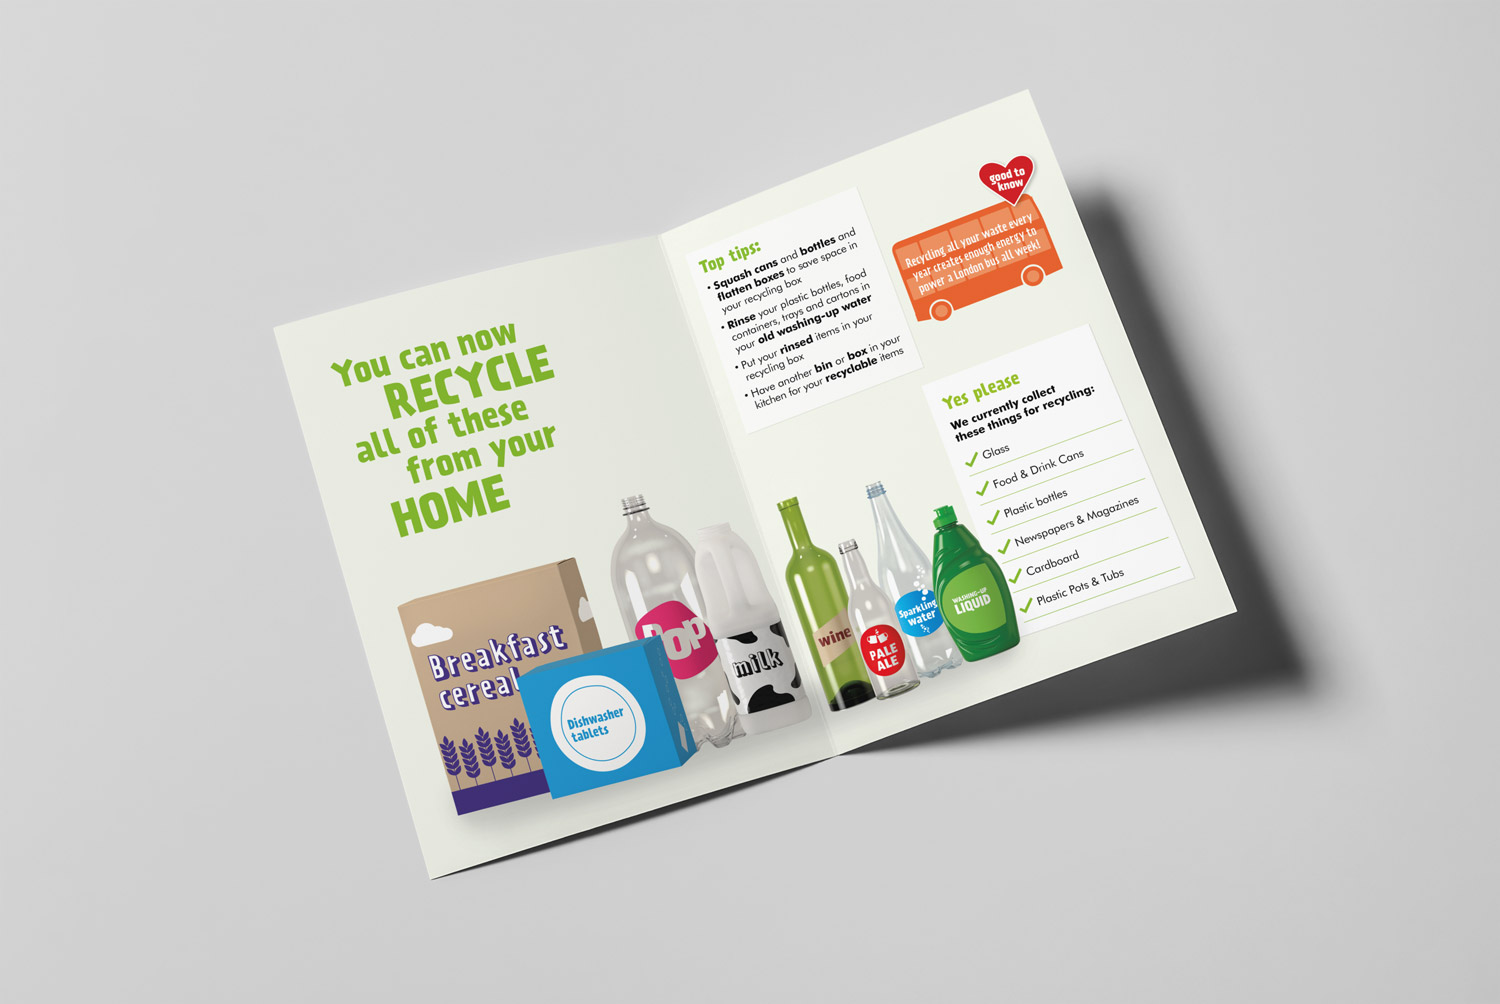 Recycle-for-London-Recycling-Leaflet-inside-spreads-by-Get-it-Sorted.jpg